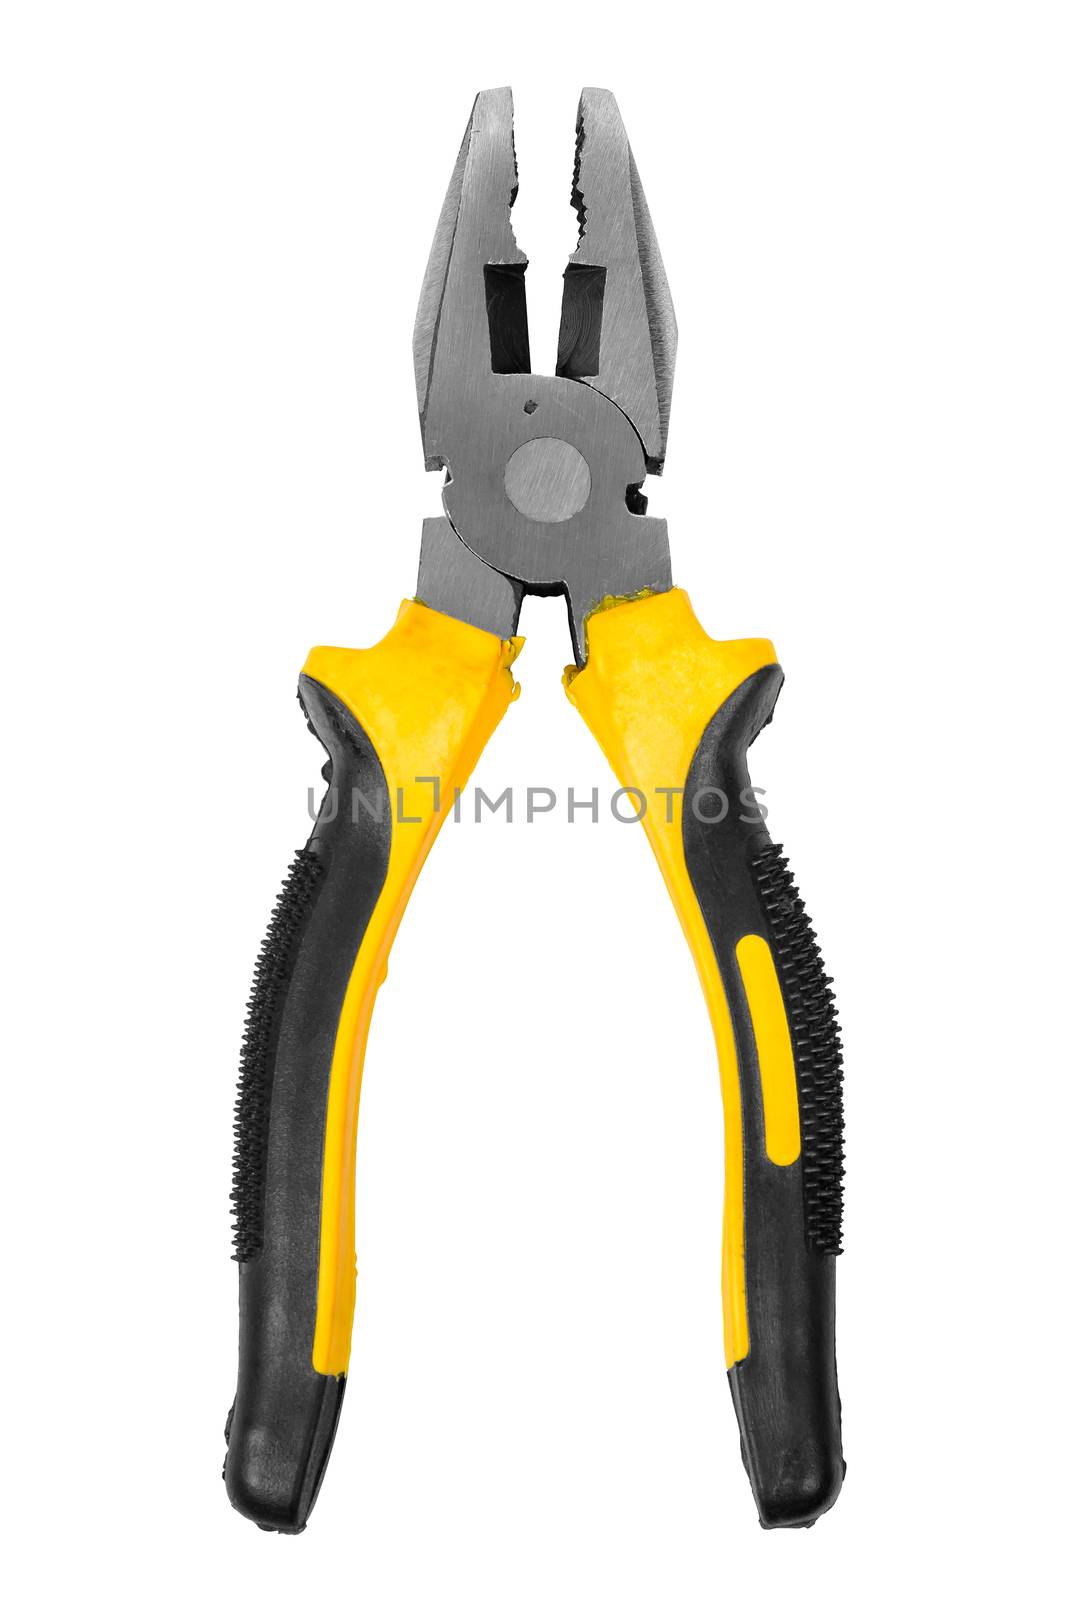 Pliers on white background by mkos83